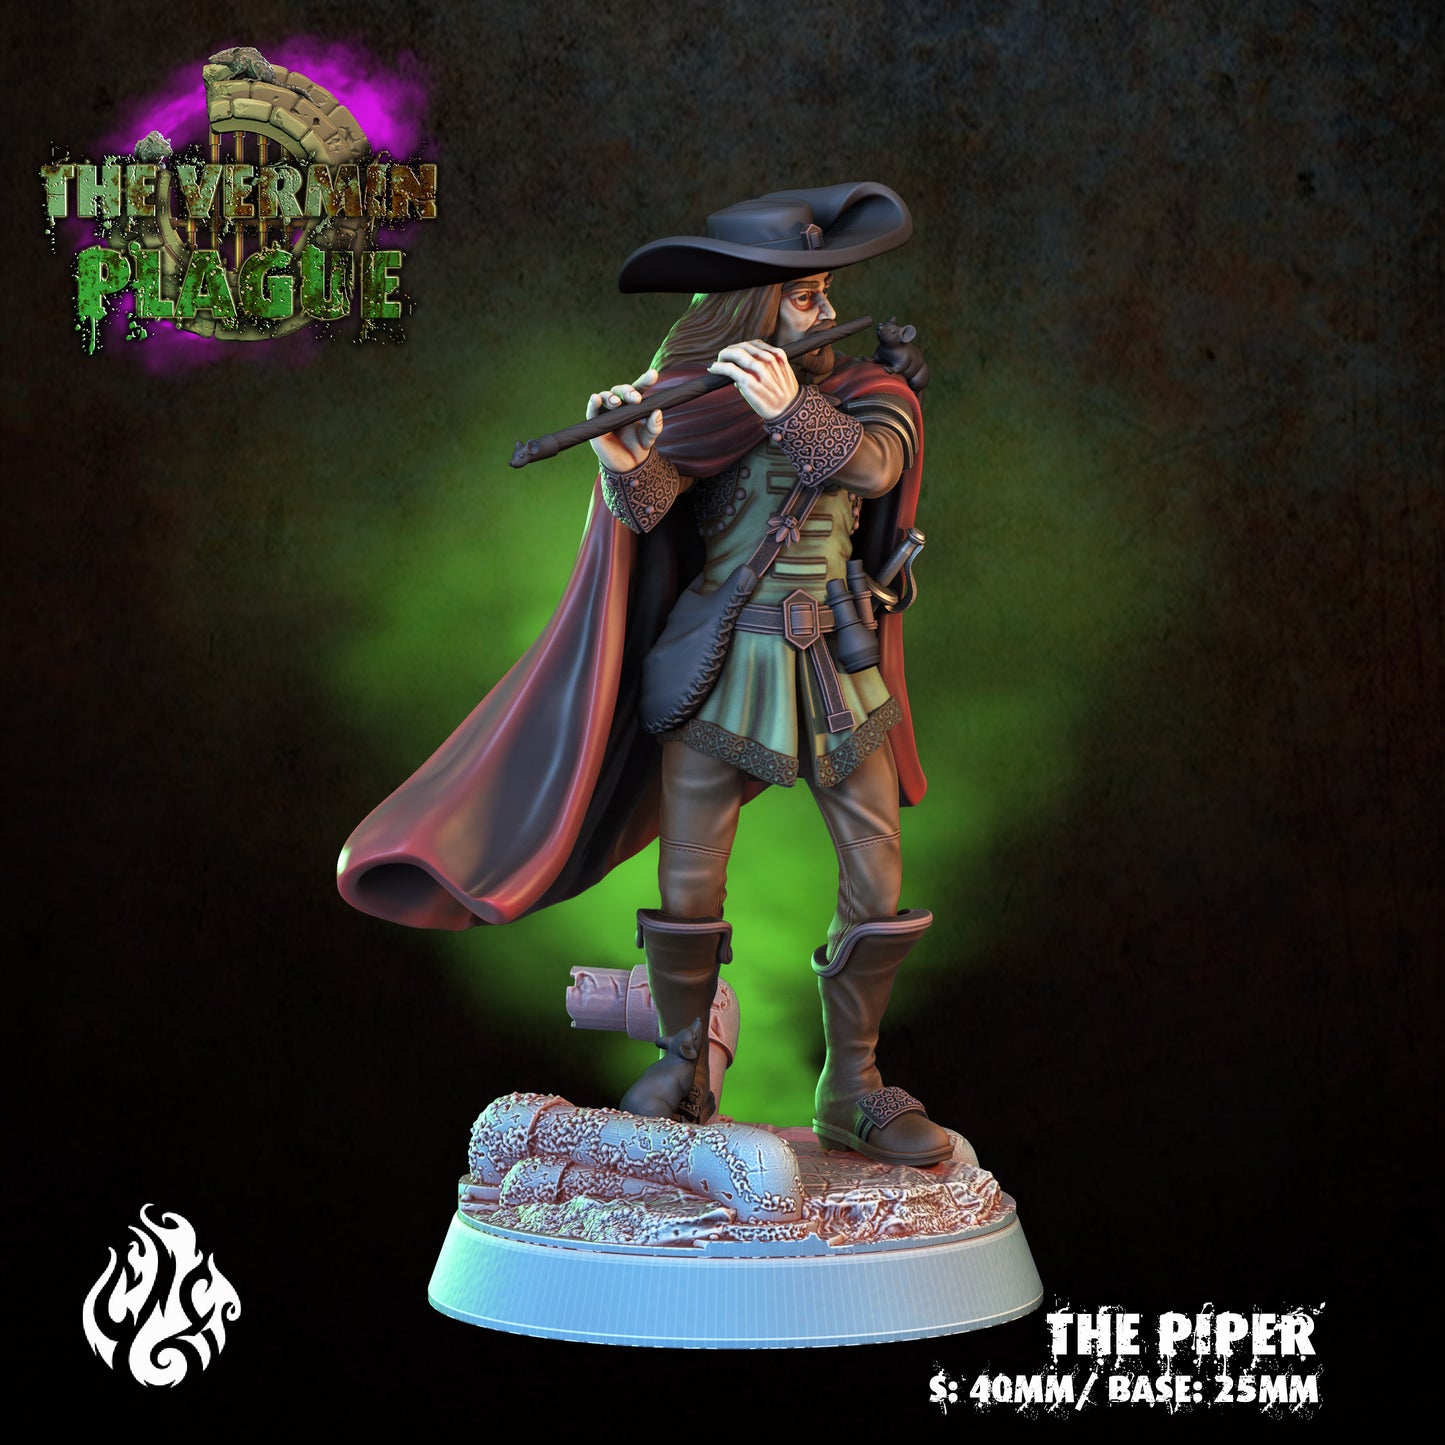 The Piper The Vermin Plague Series from Crippled God Foundry - Table-top gaming mini and collectable for painting.